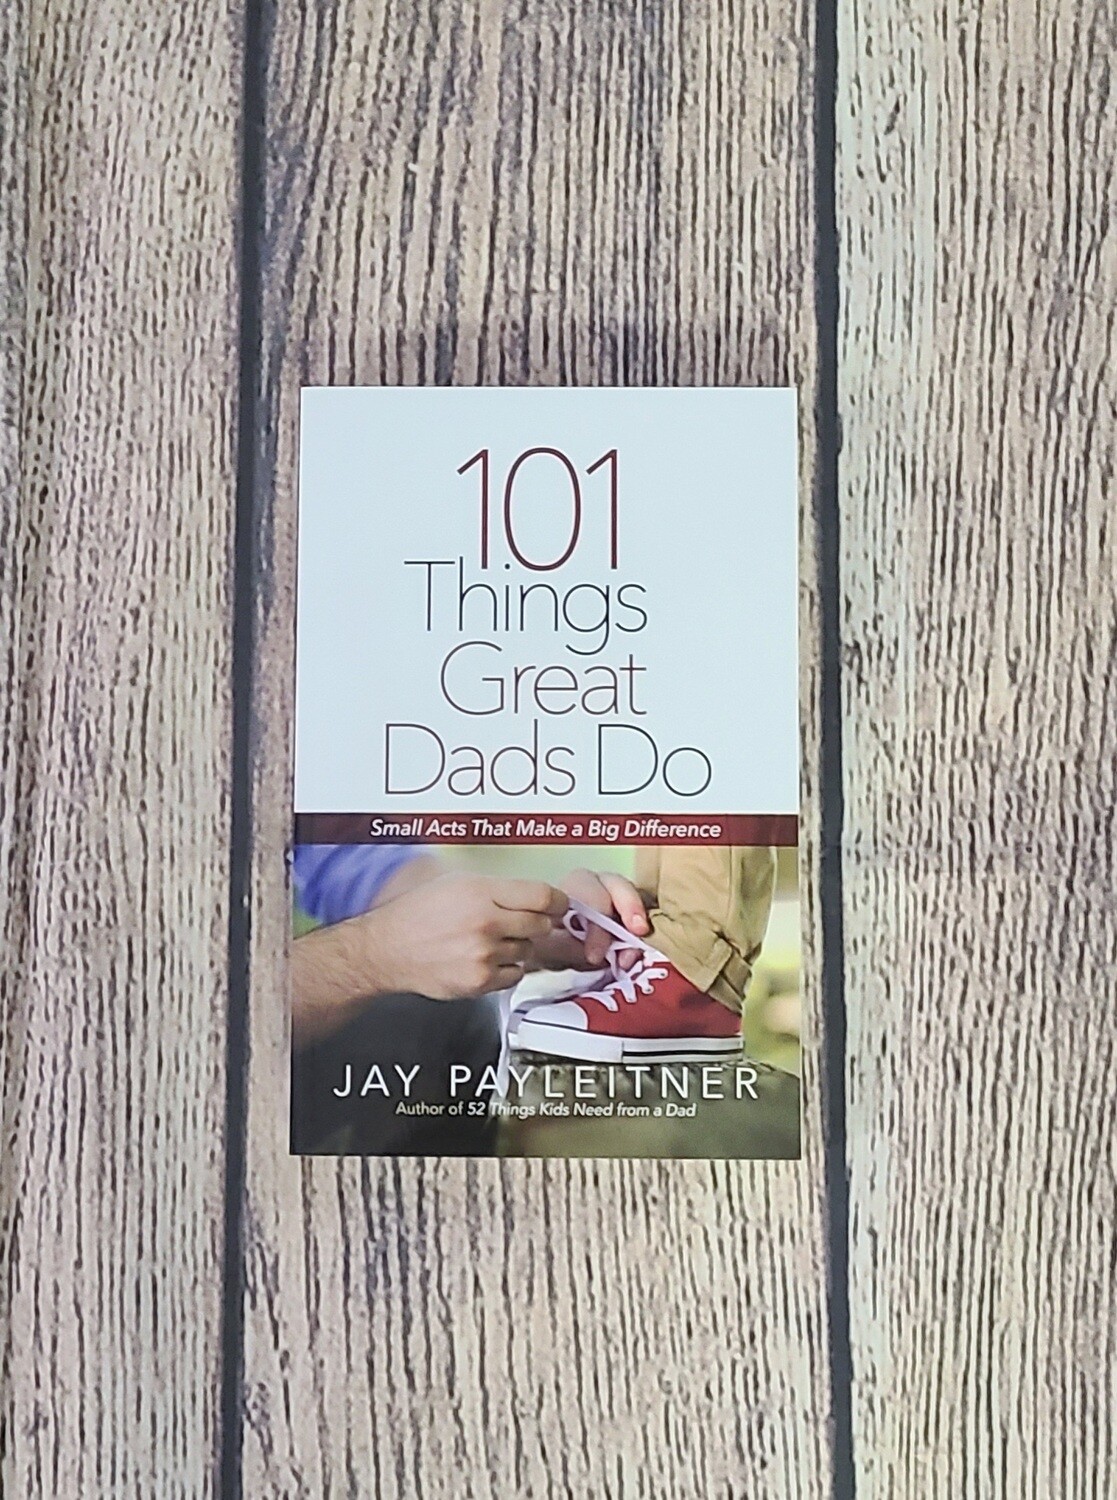 101 Things Great Dads Do by Jay Payleitner